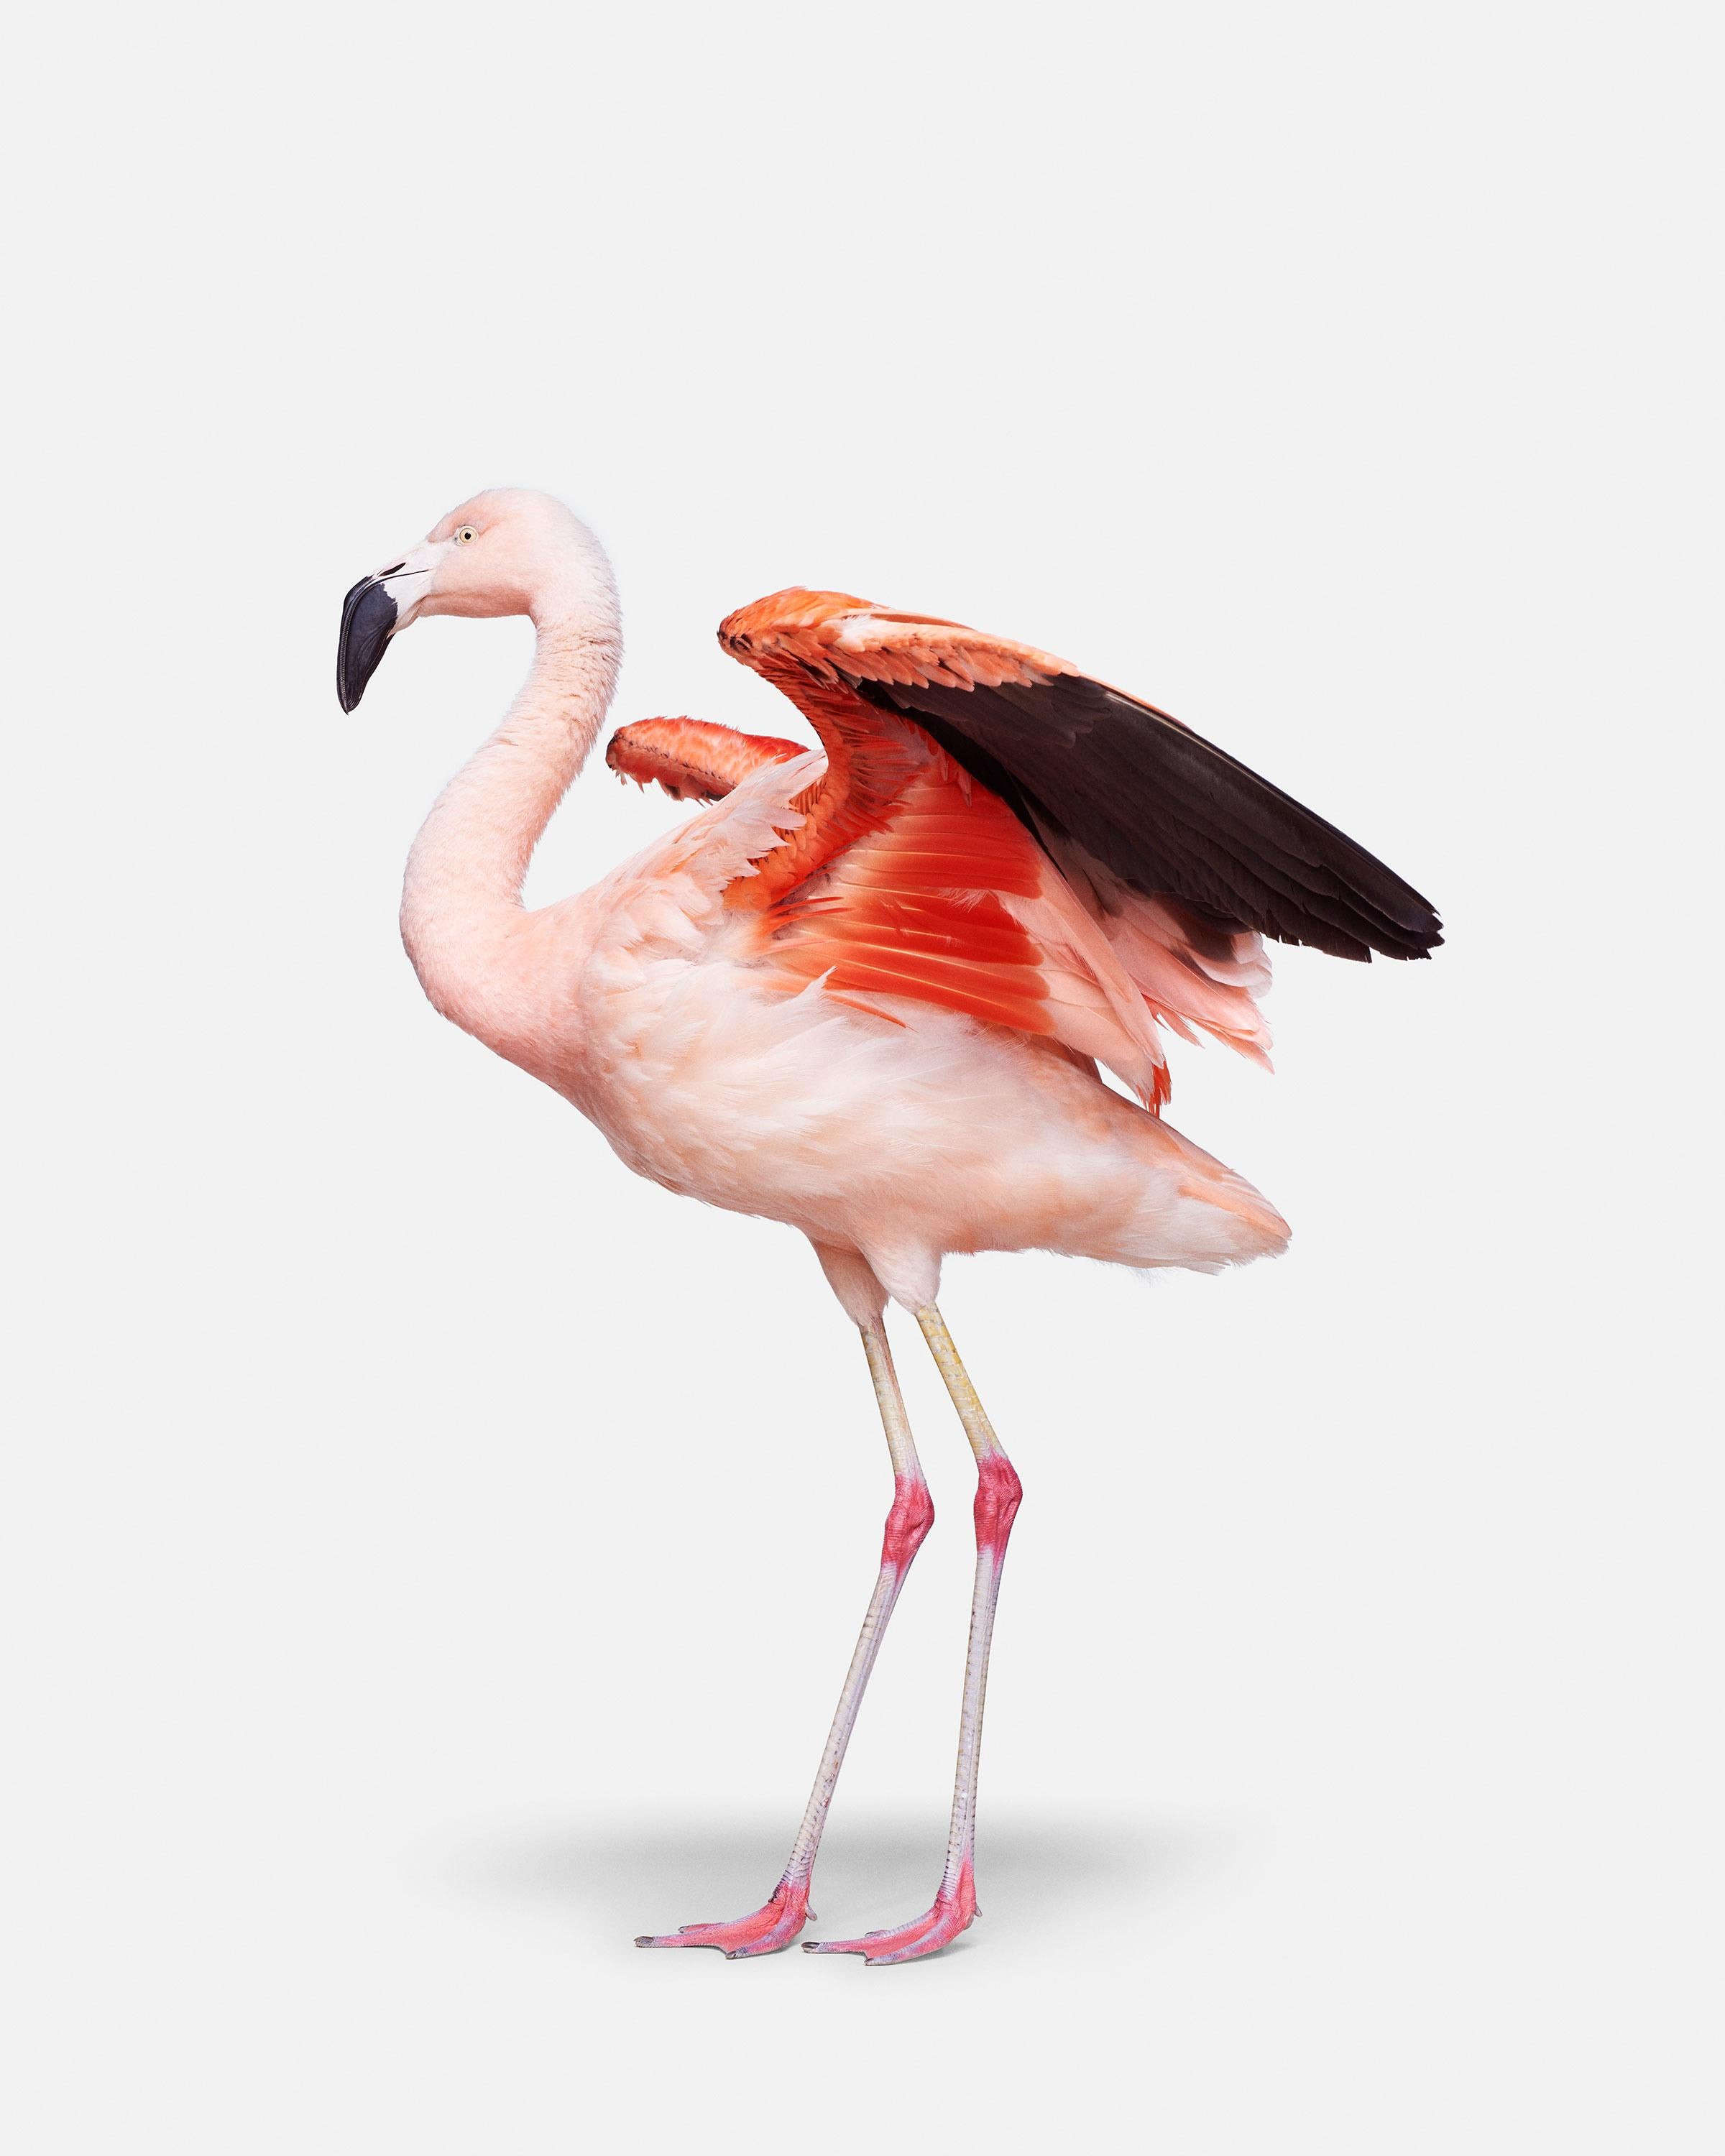 Randal Ford - Flamingo No. 3, Photography 2018, Printed After